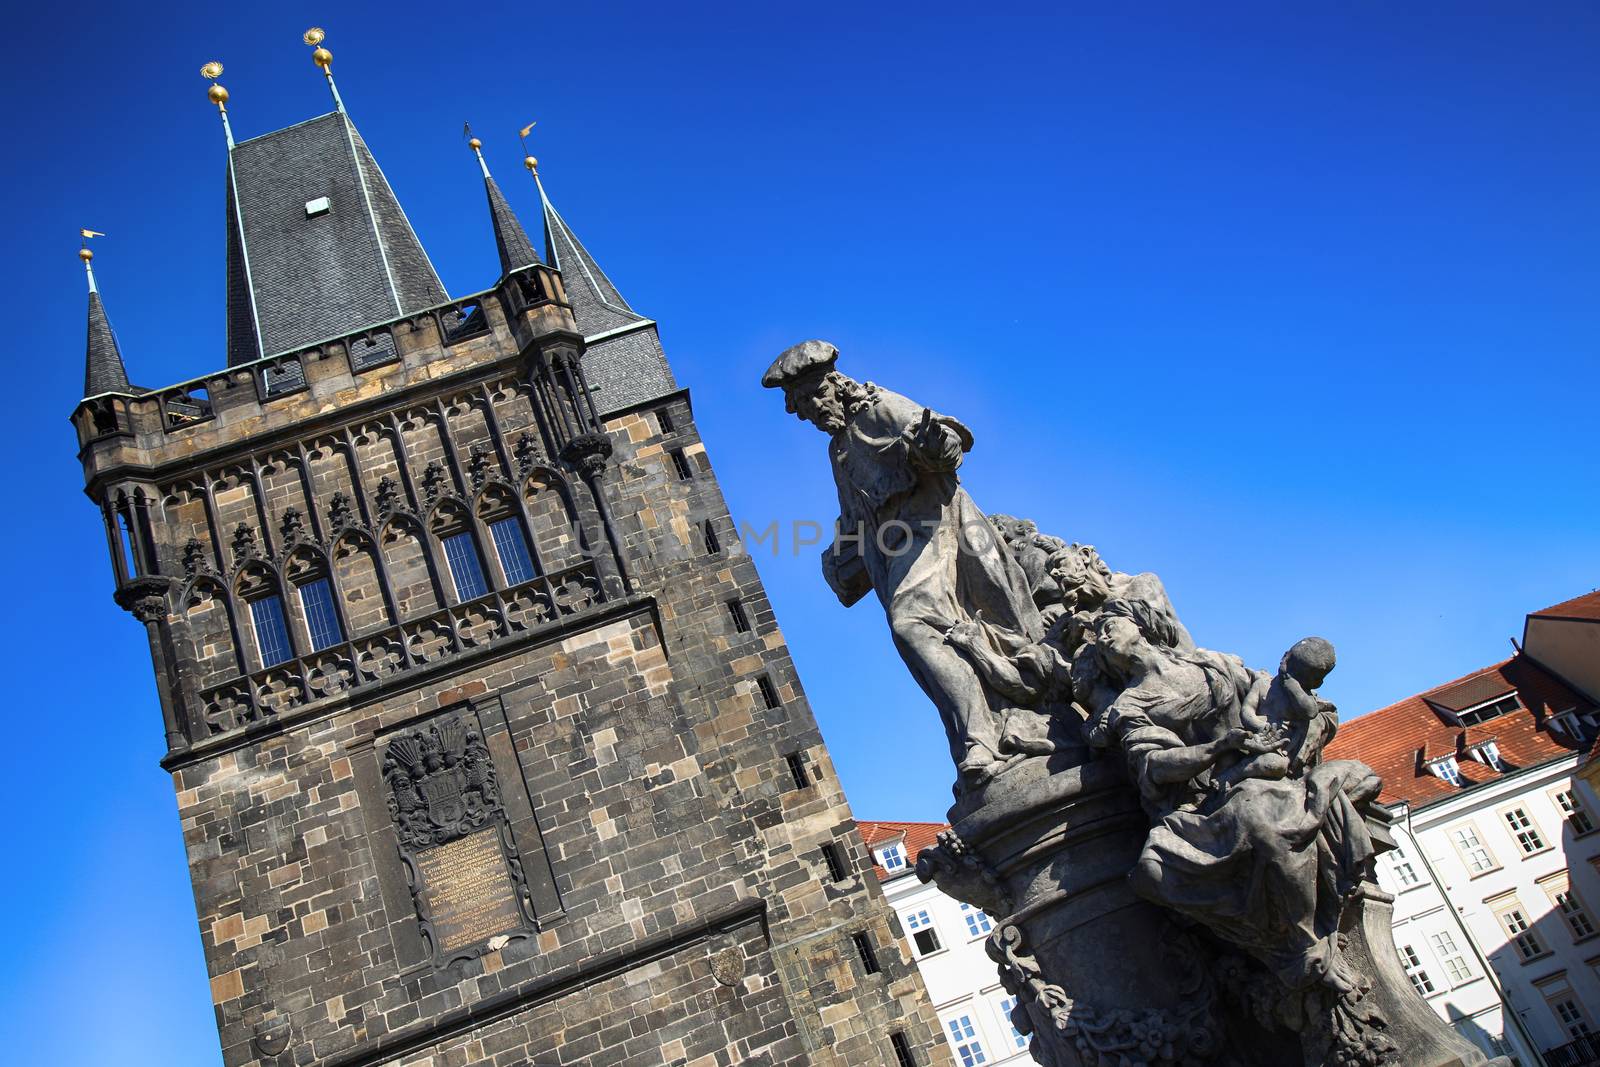 View of the Old Town Bridge Tower (Stare Mesto Tower) with statue on the Charles Bridge (Karluv Most) in Prague, Czech Republic